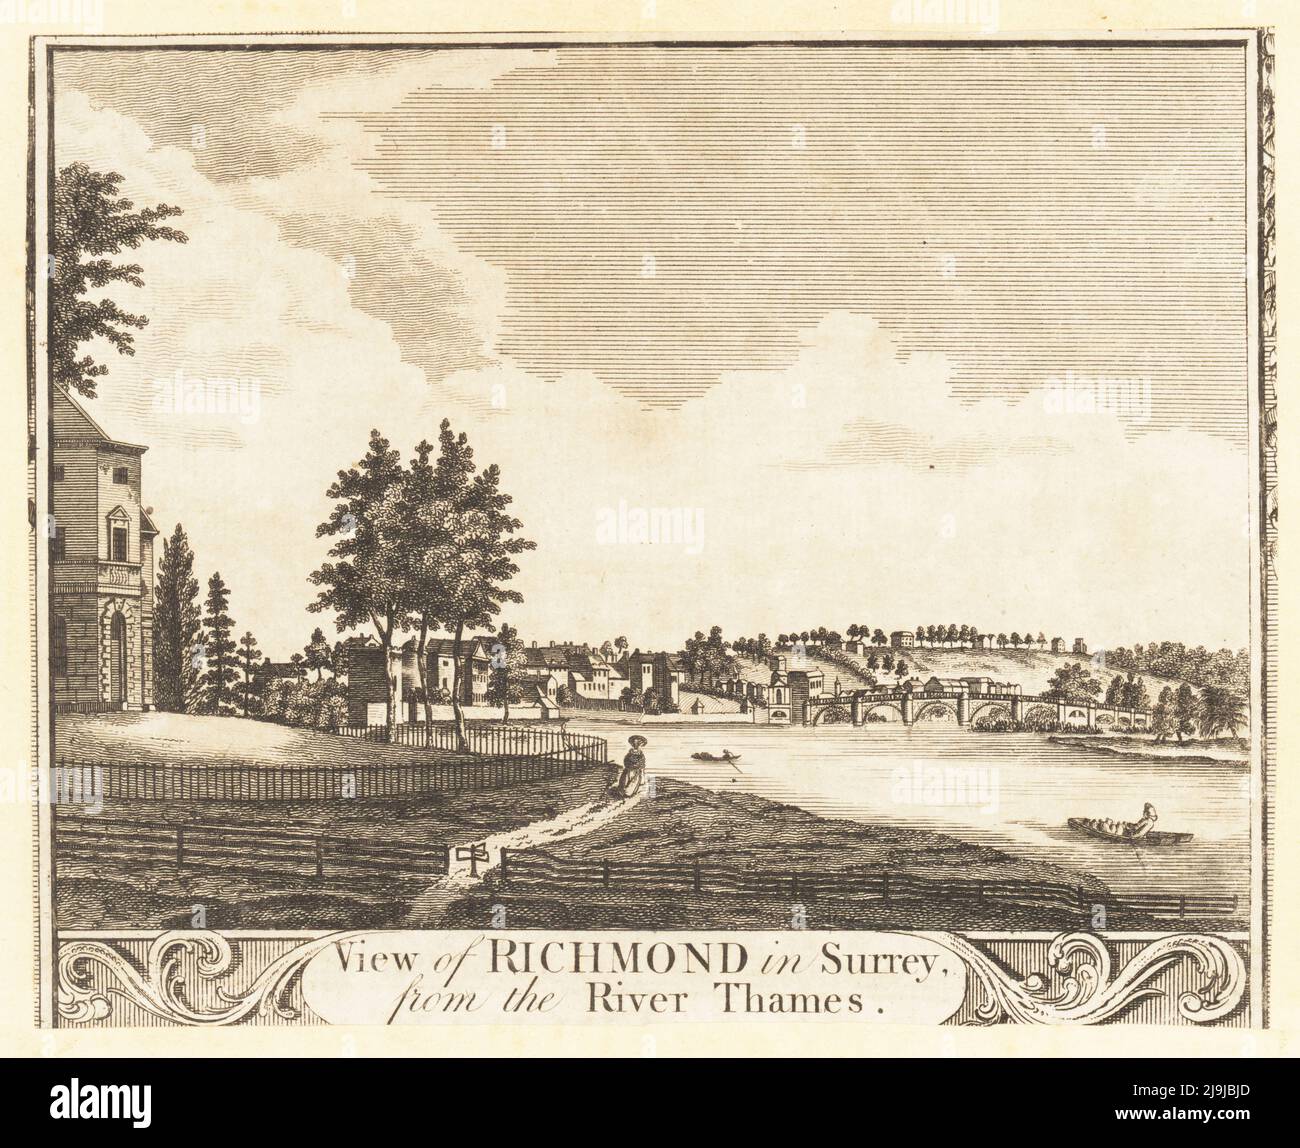 View of Richmond in Surrey from the River Thames, 18th century. Richmond Place (now Asgill House), a Palladian villa built by Sir Robert Taylor in 1757, in the foreground. The stone arch bridge Richmond Bridge was built in 1774-77 by architects James Paine and Kenton Couse. Copperplate engraving from William Thornton’s New, Complete and Universal History of the City of London, Alexander Hogg, King's Arms, No. 16 Paternoster Row, London, 1784. Stock Photo